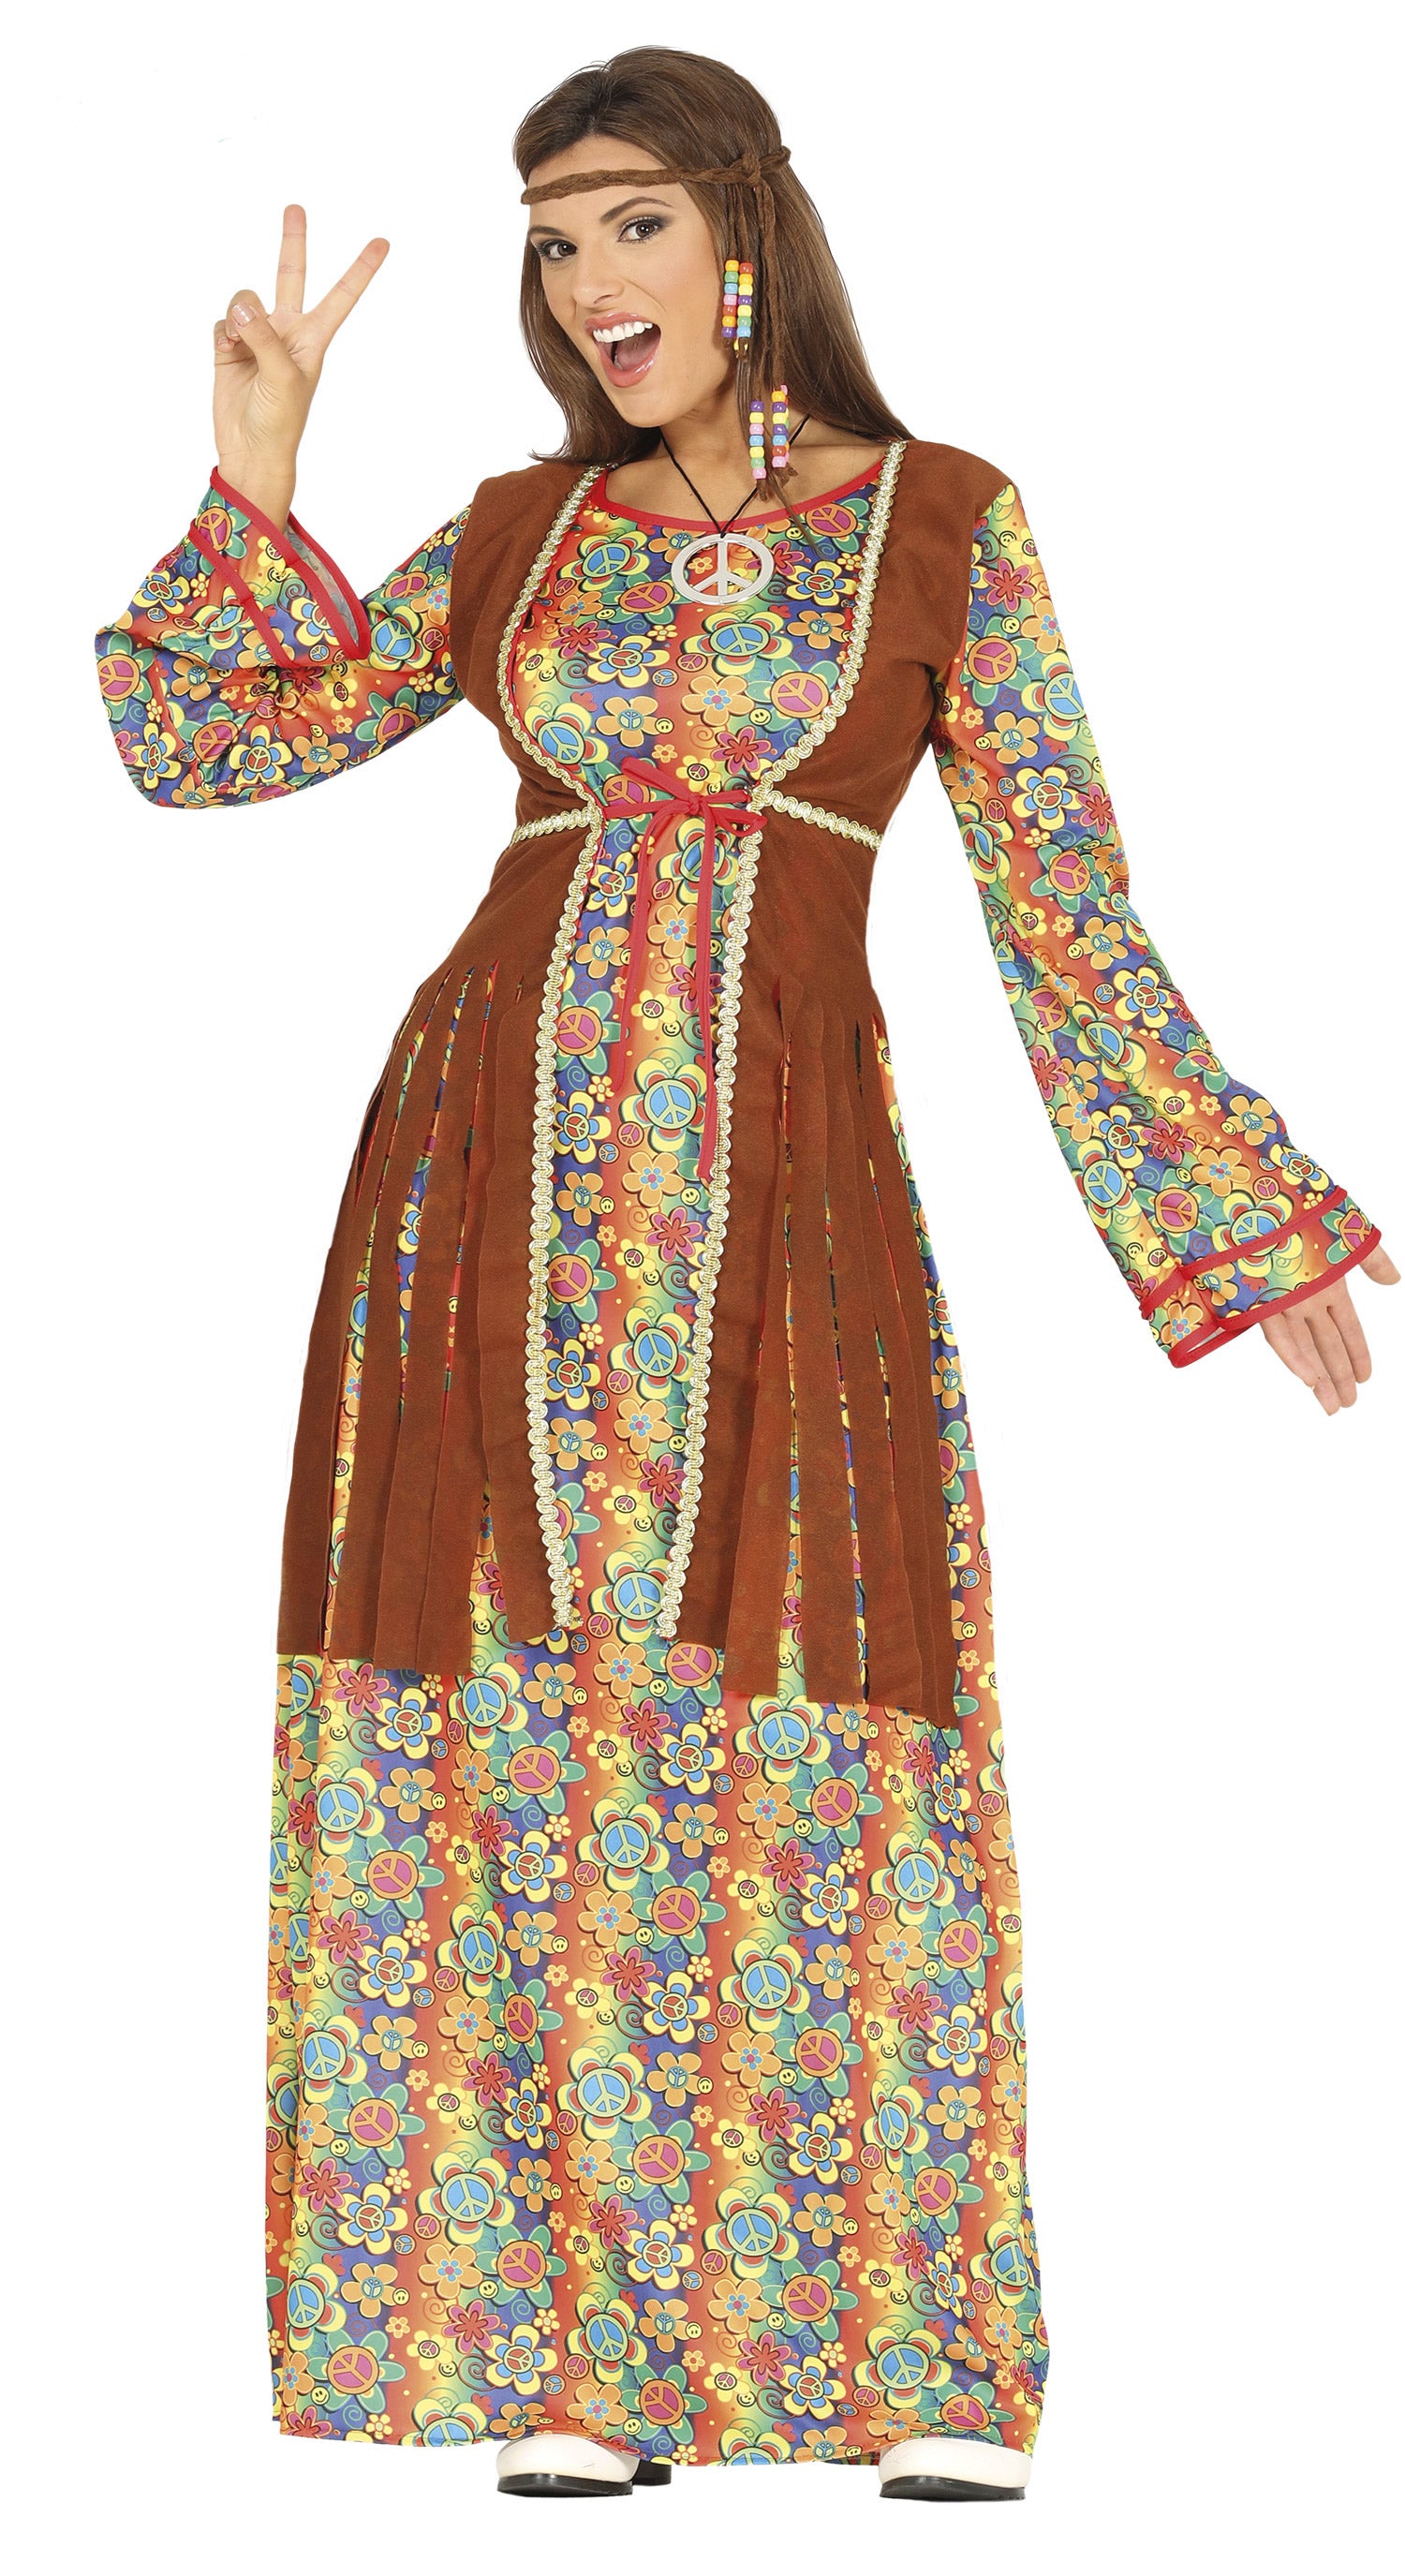 ladies Flower Daughter Hippy costume with flower pattern